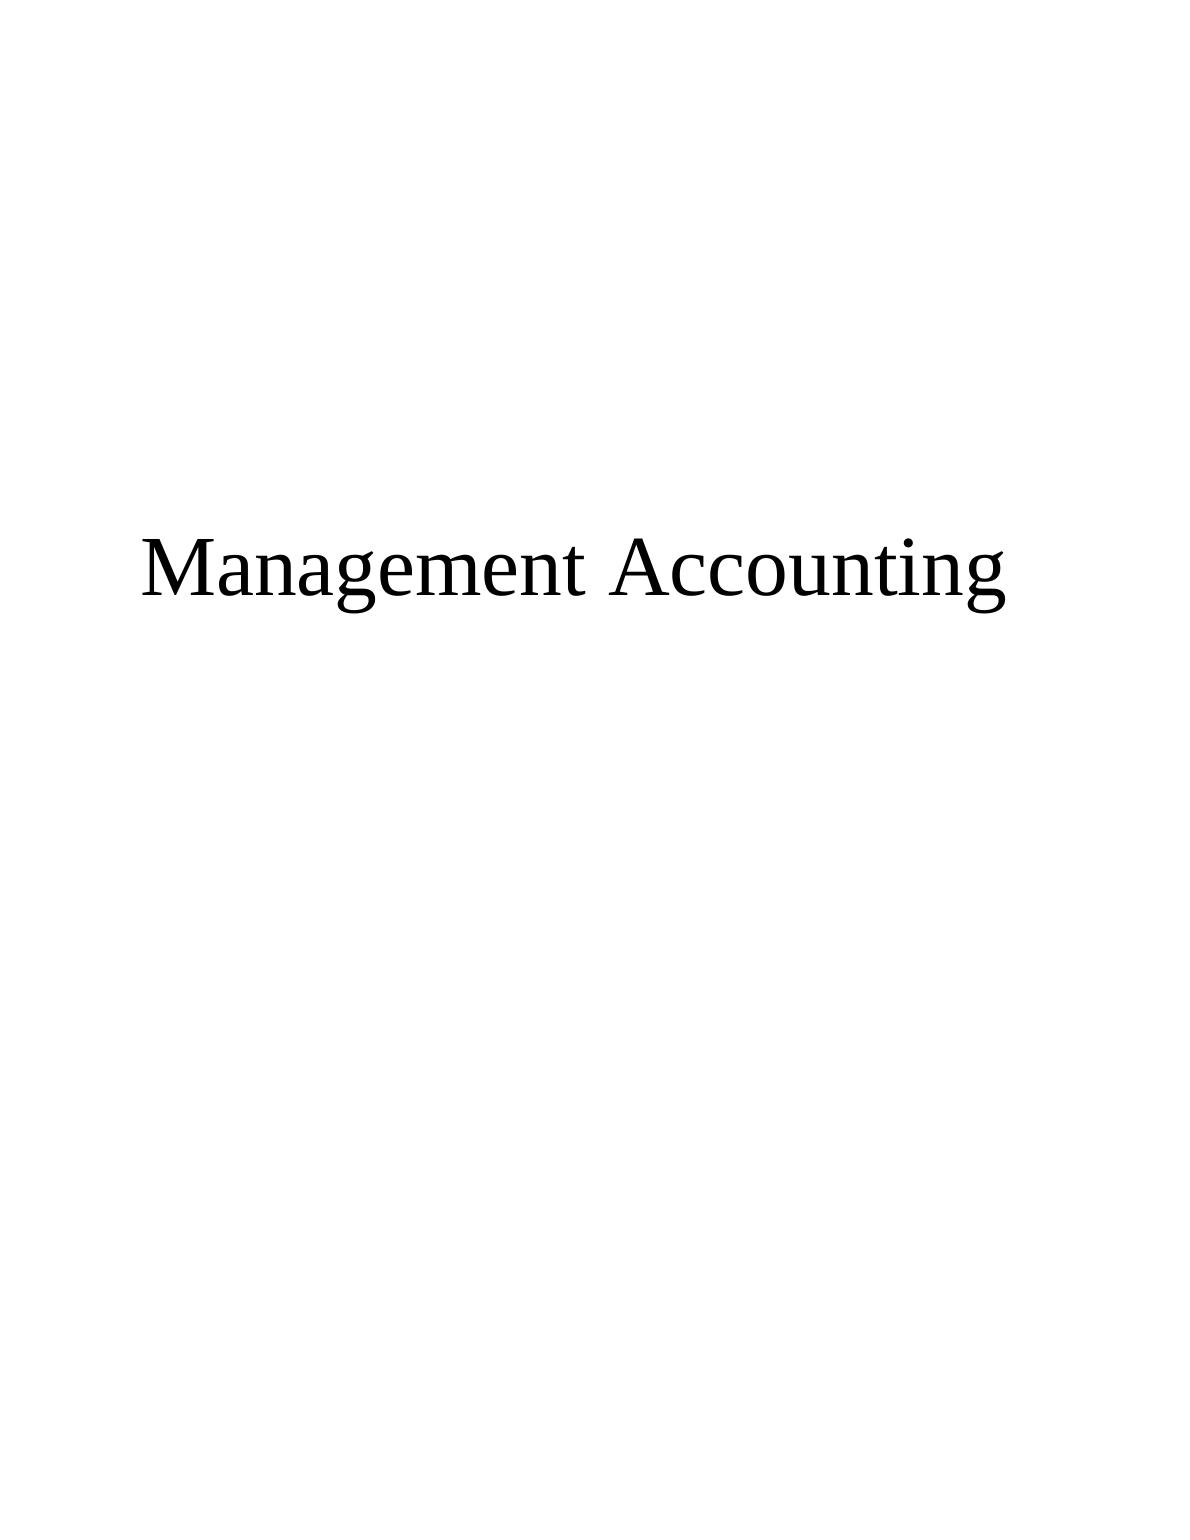 Management Accounting Assignment - Aston chemicals_1